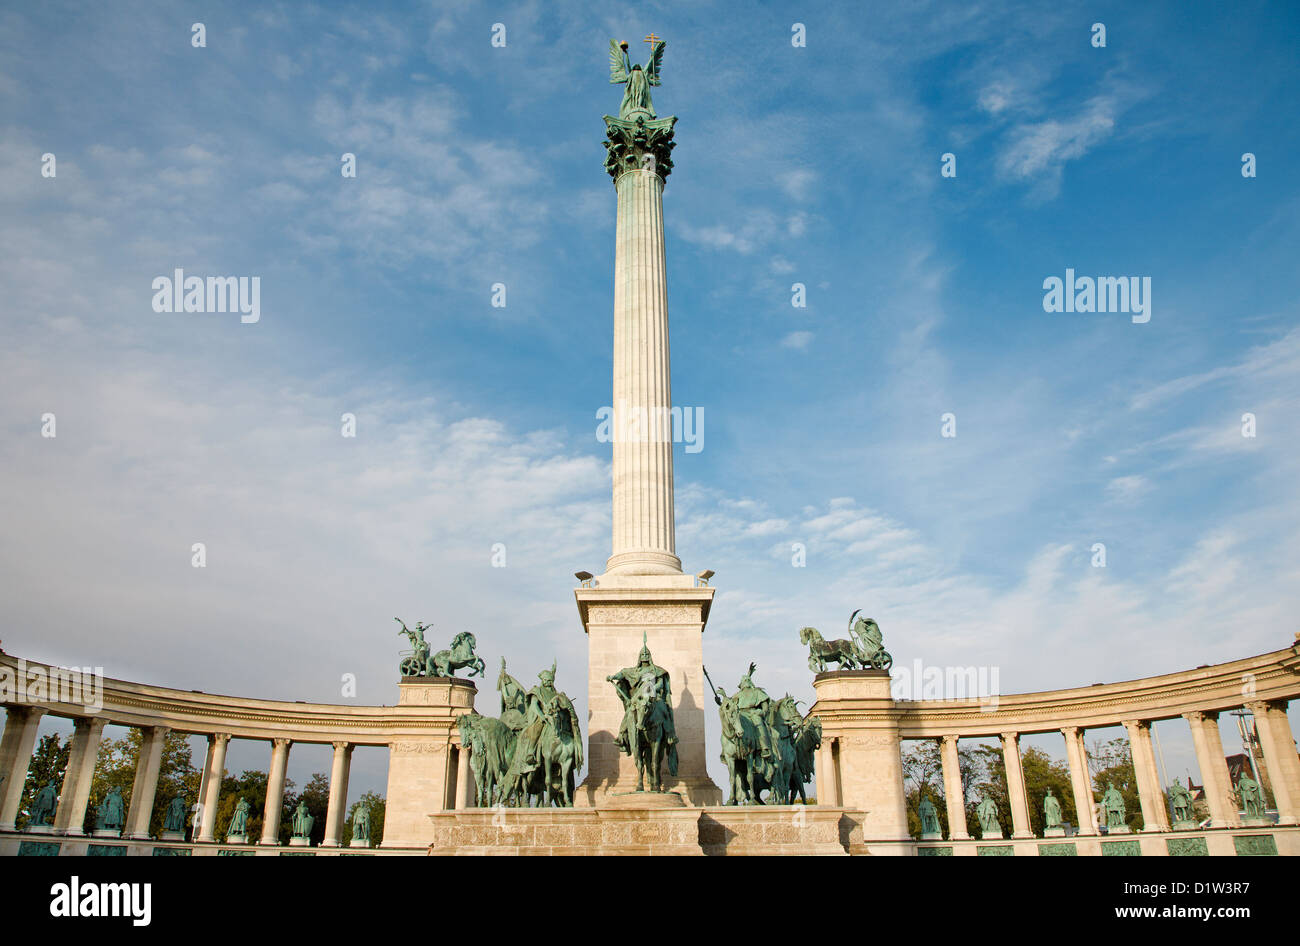 Budapest - The Millennium Monument in Heroes' Square Stock Photo